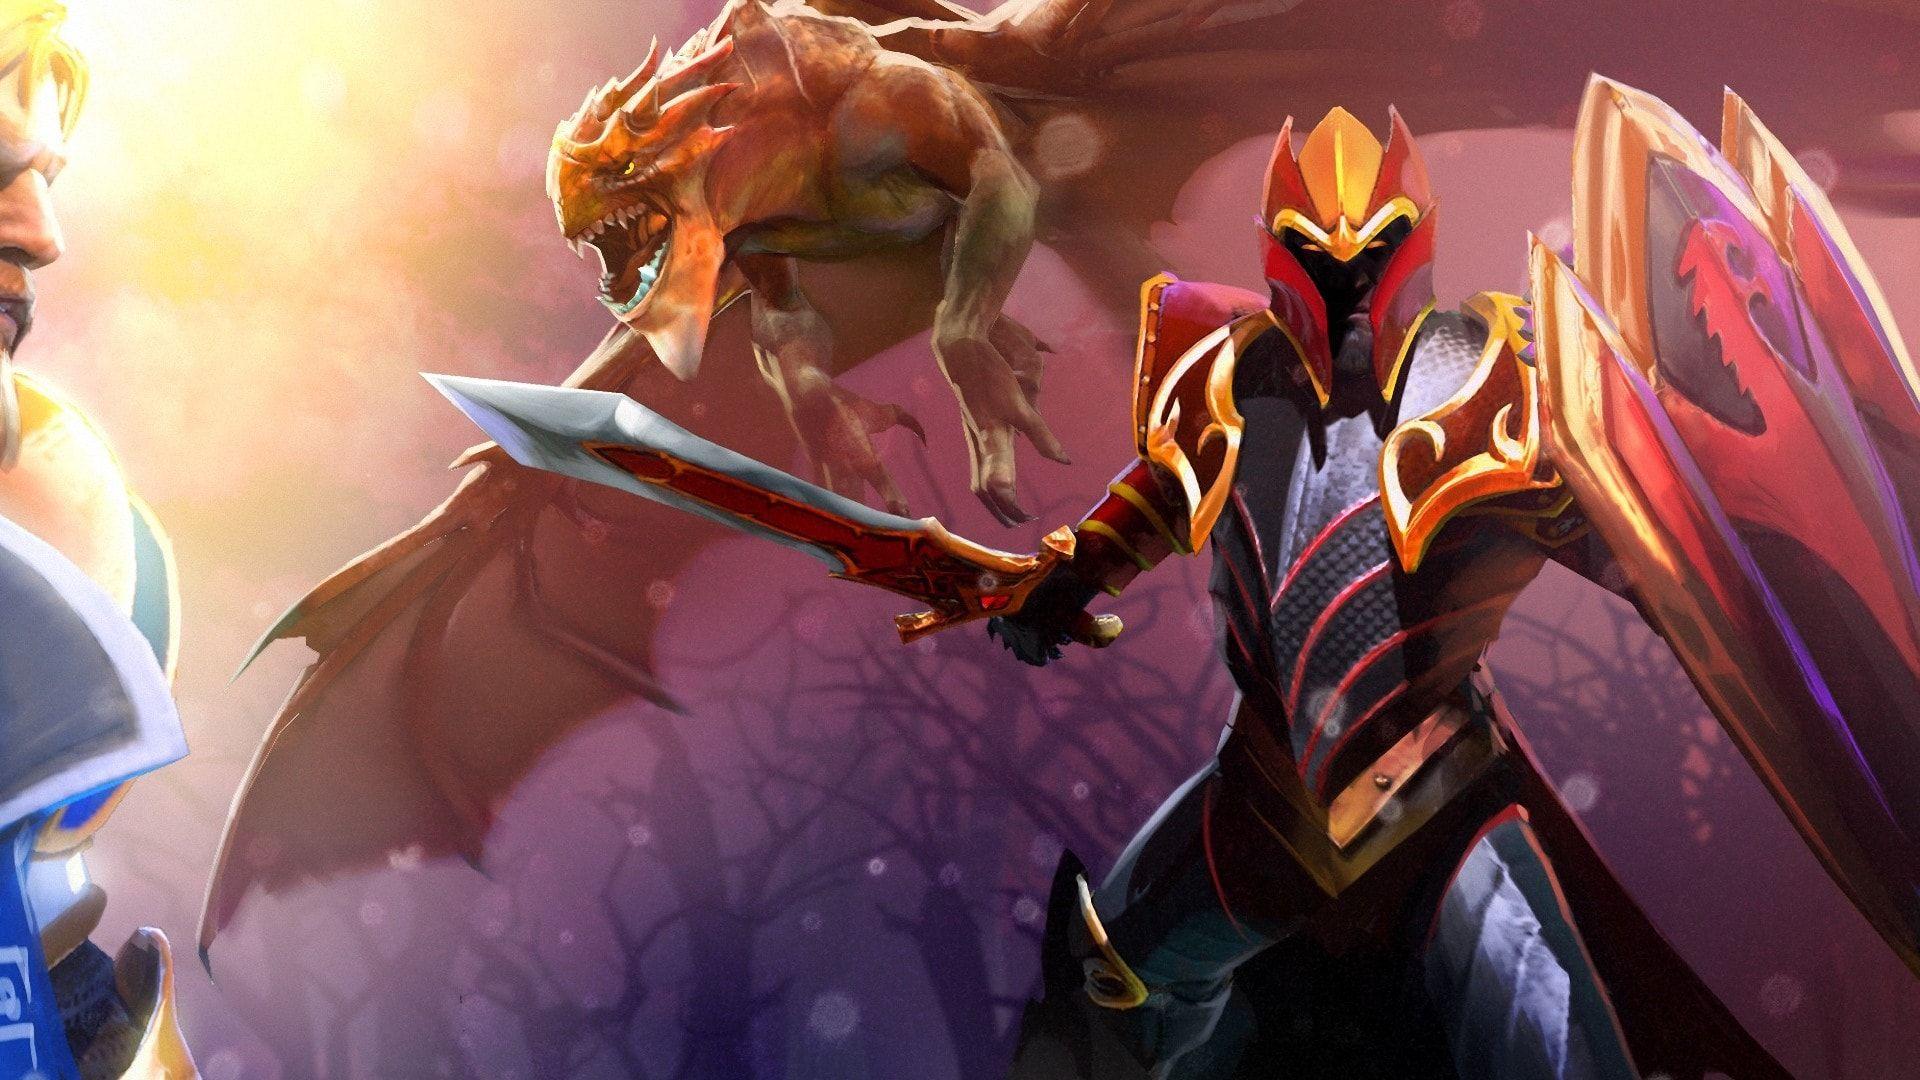 Dota 2 Dragon Knight Wallpaper Image with High Definition